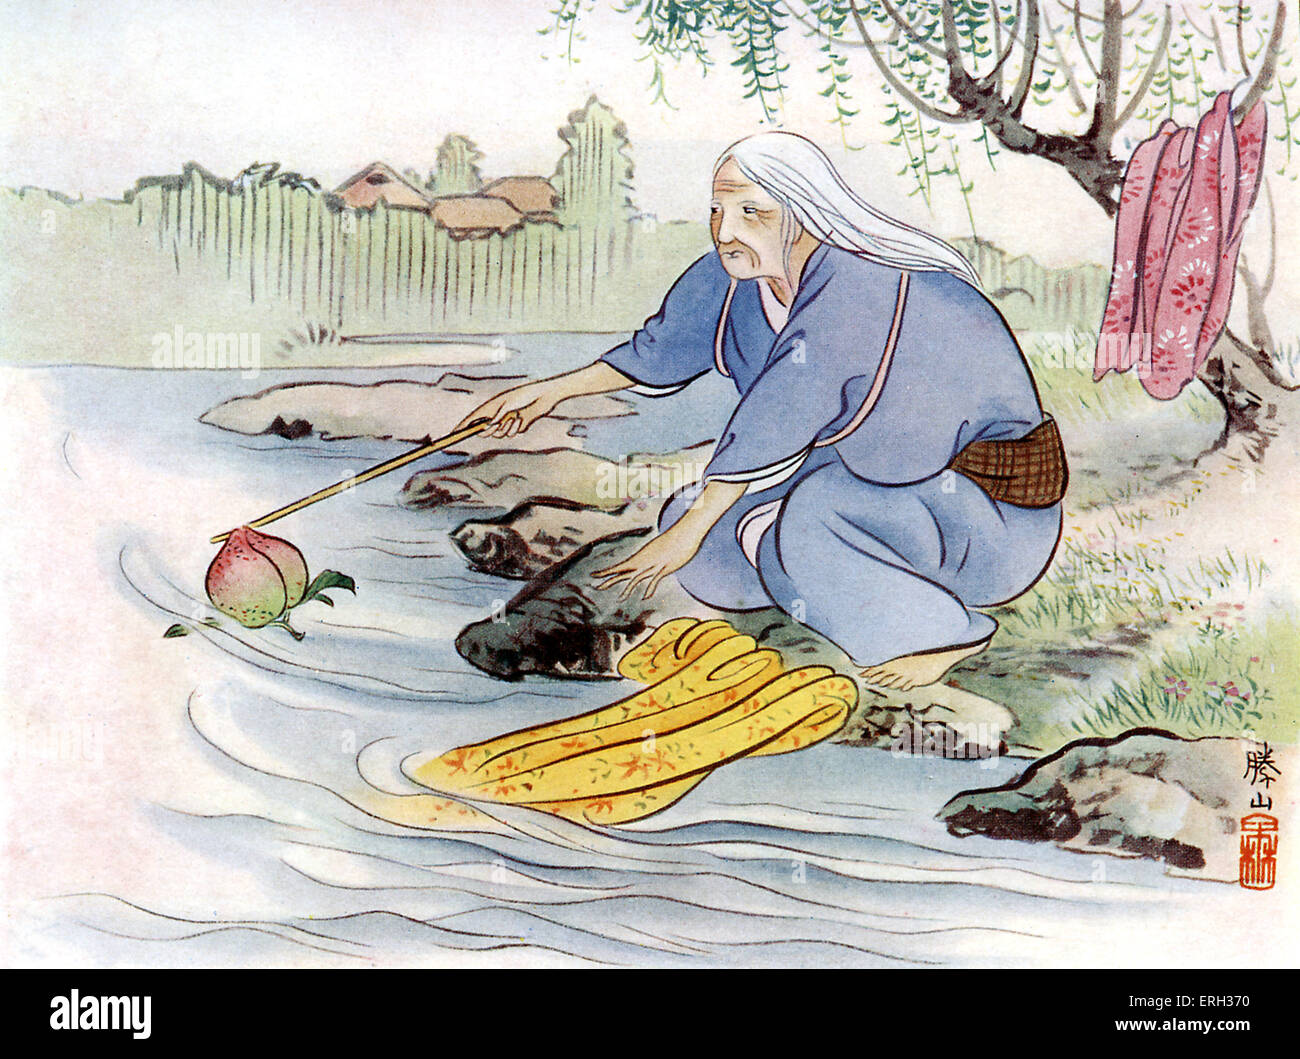 Momotaro Or The Little Peach Child From Wonder Tales Of Old Japan By Alan Leslie Whitehorn Published 1911 Japanese Folk Stock Photo Alamy